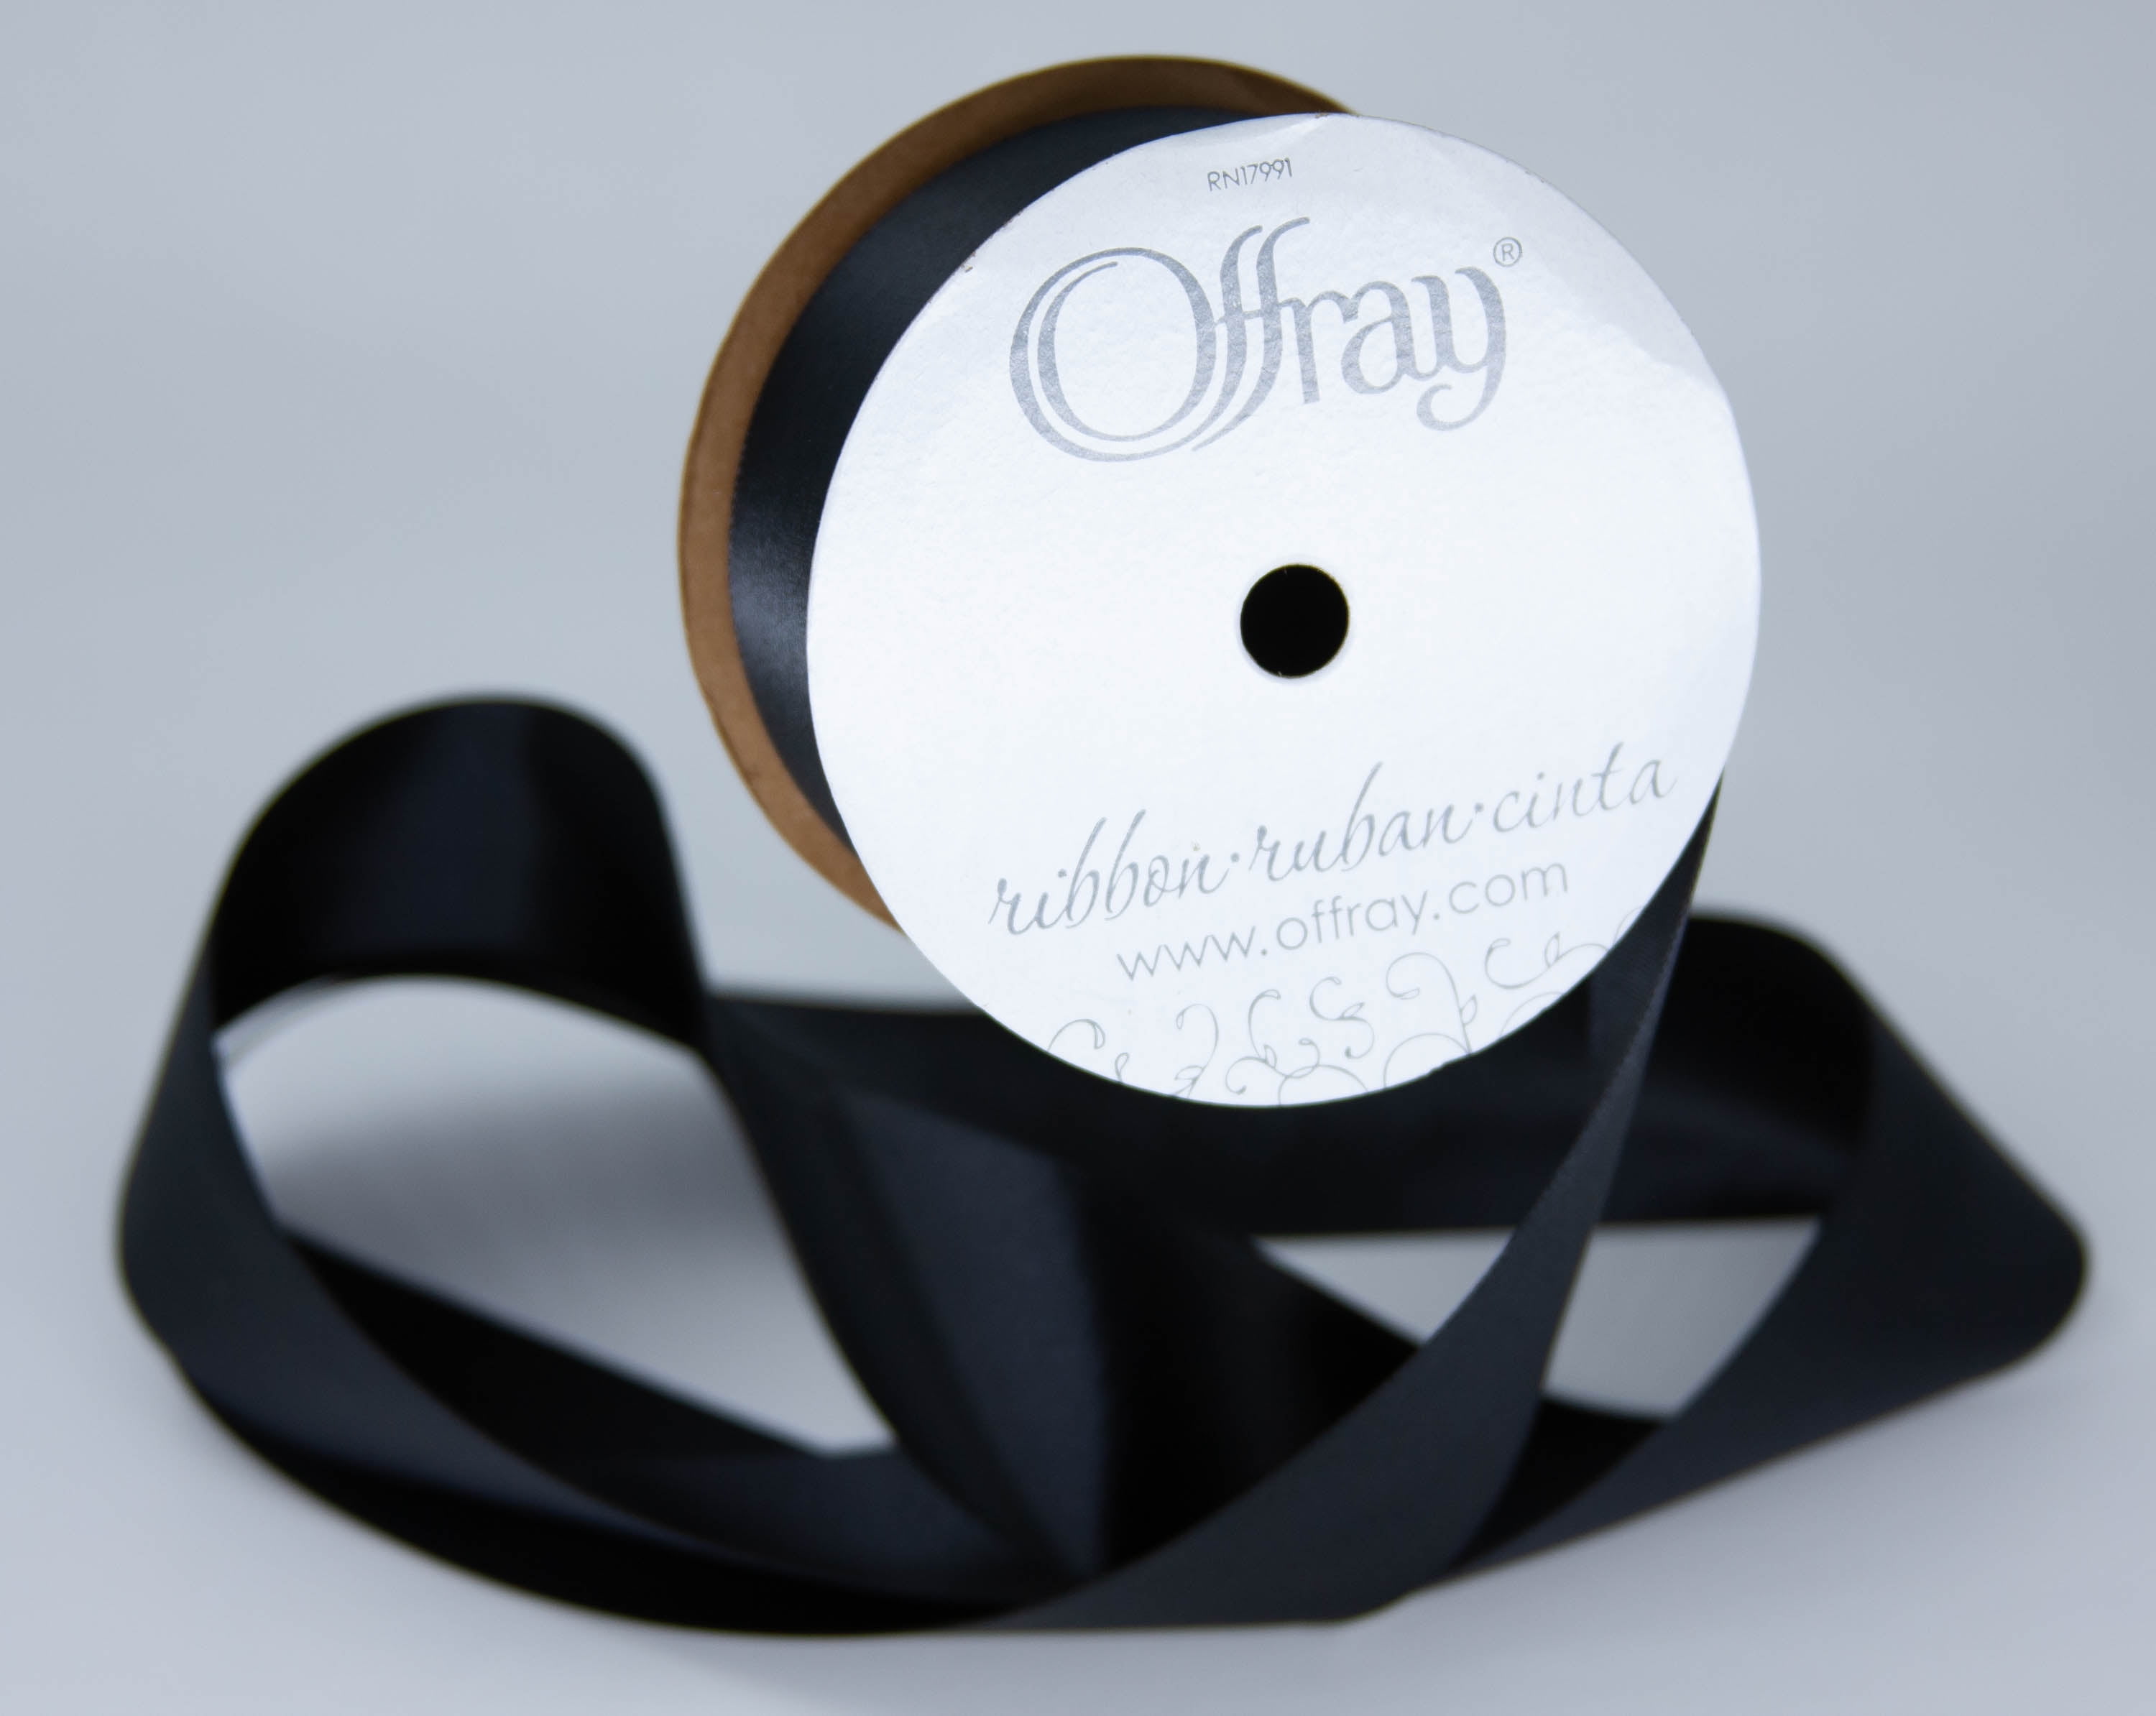 1 New & 1 Partiality Used - Offray White & Black Volleyball Ribbon